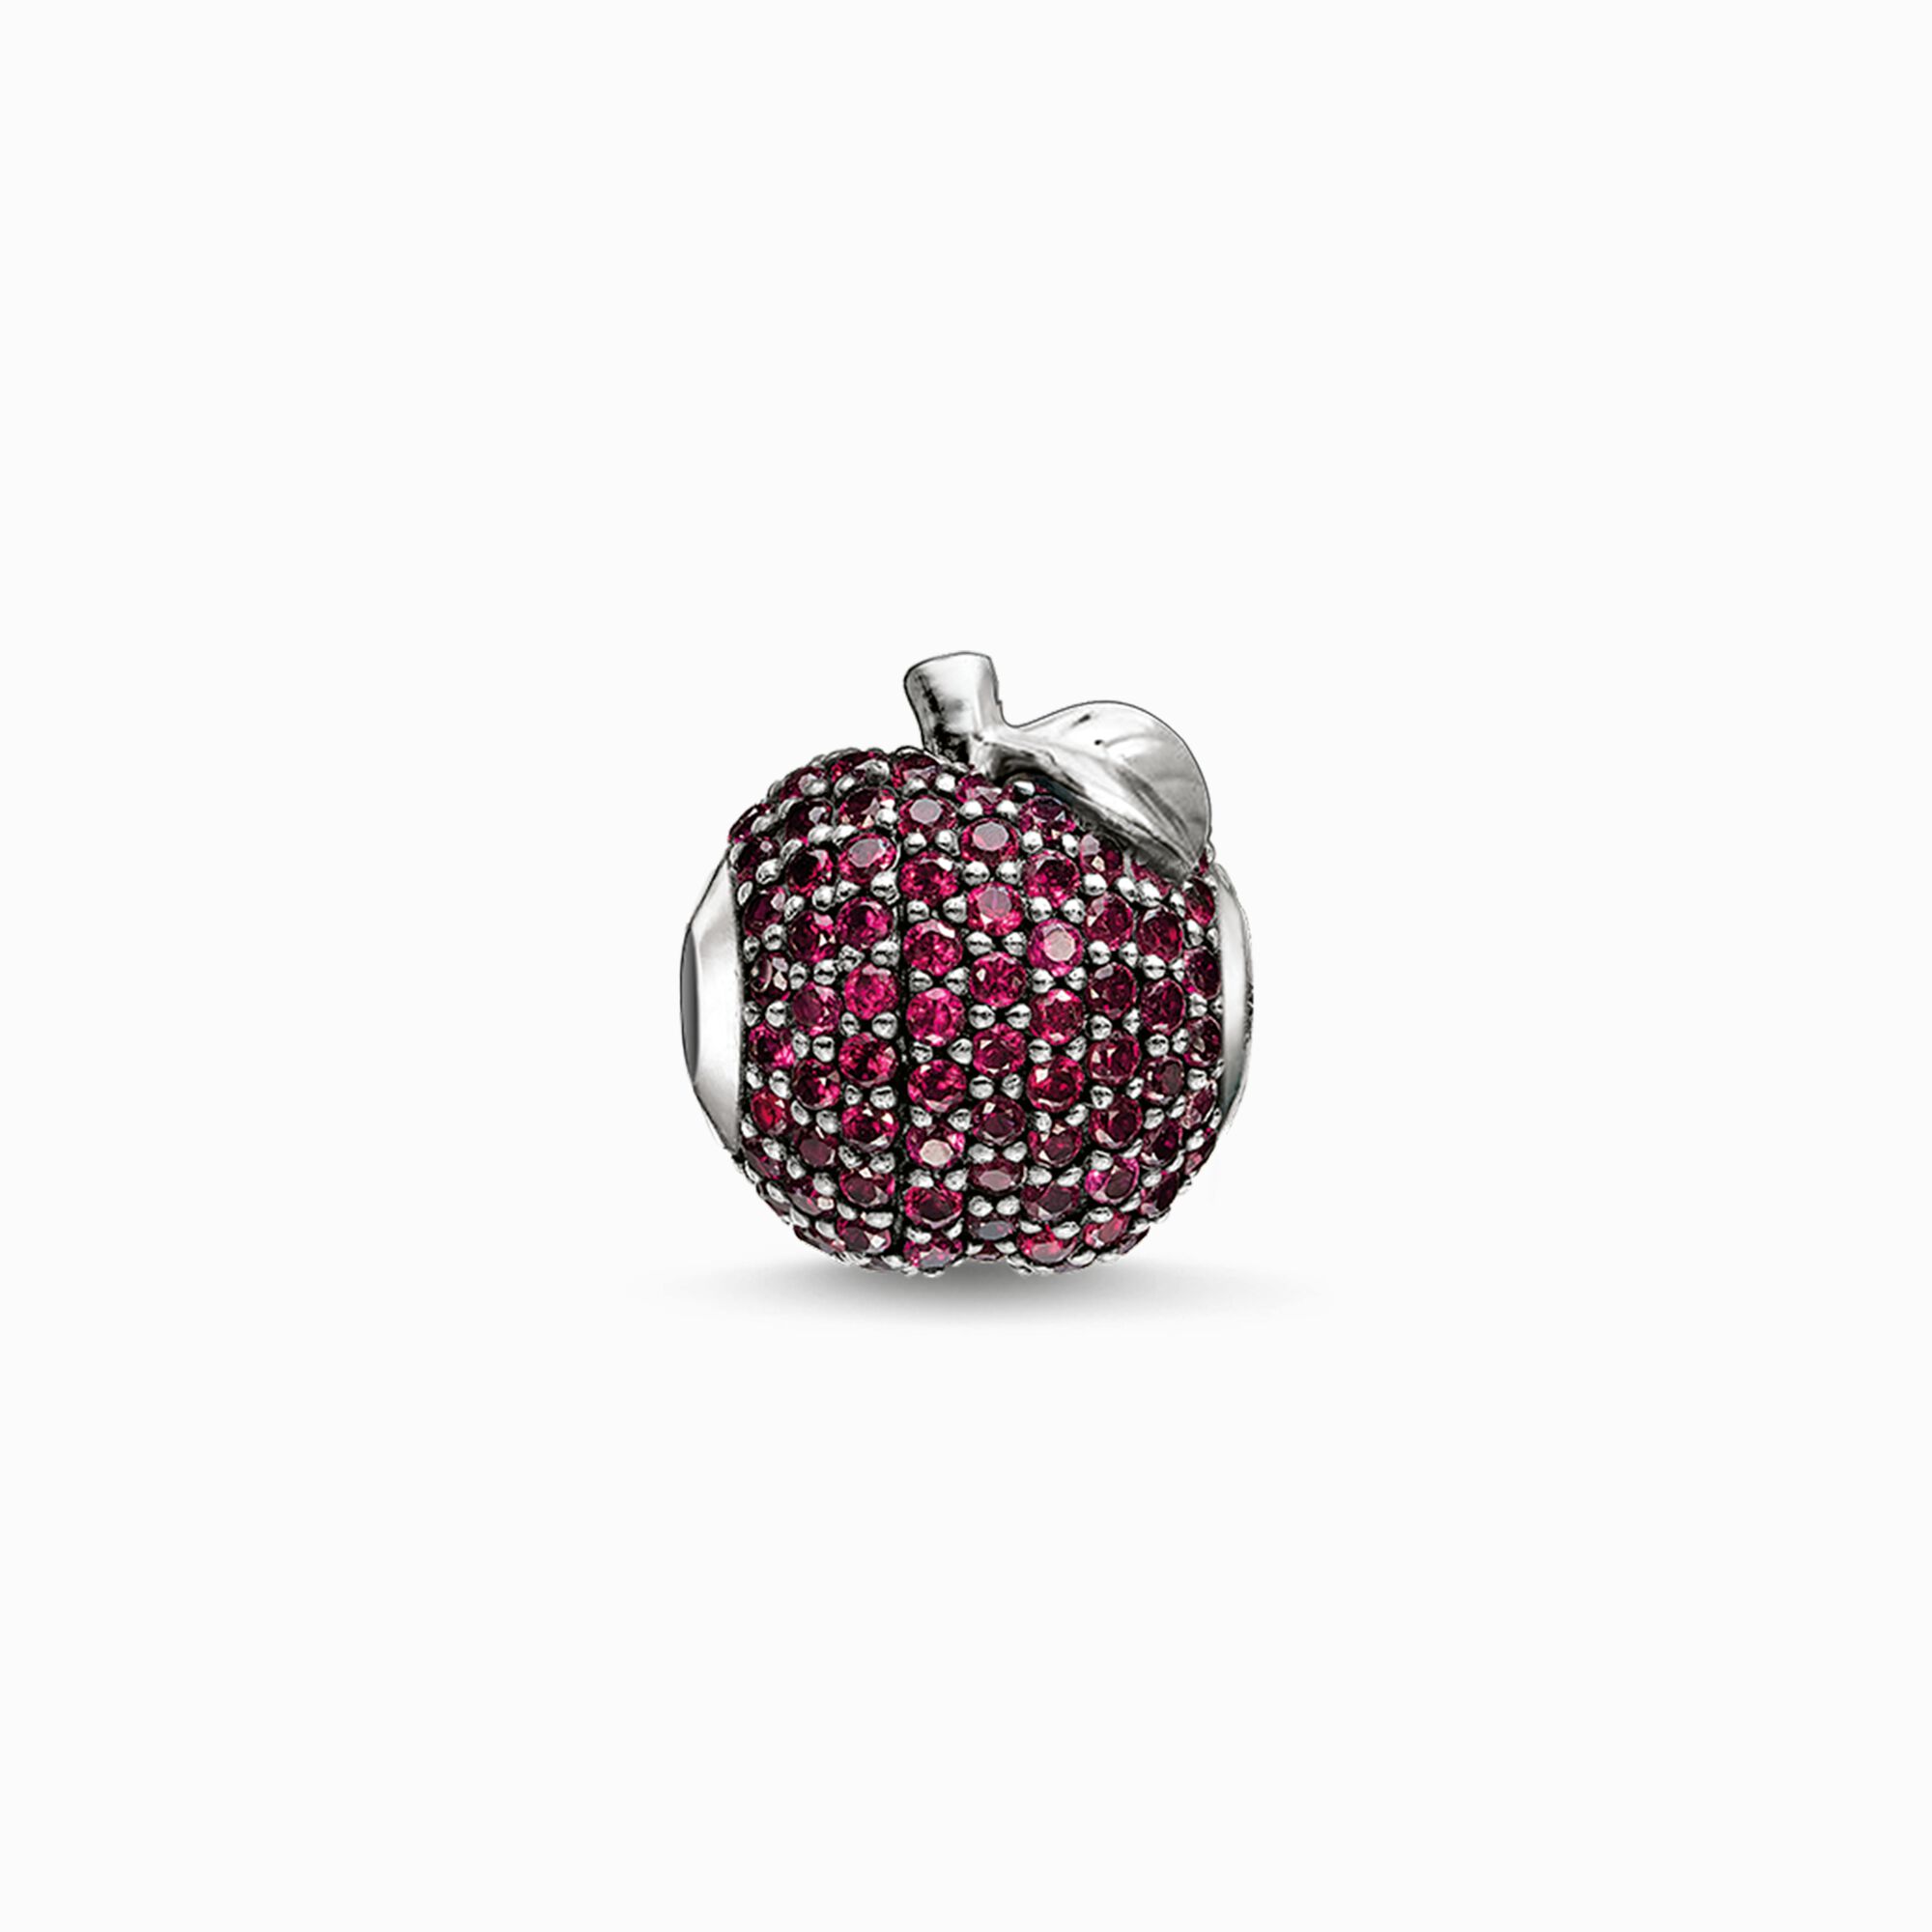 Bead red apple from the Karma Beads collection in the THOMAS SABO online store